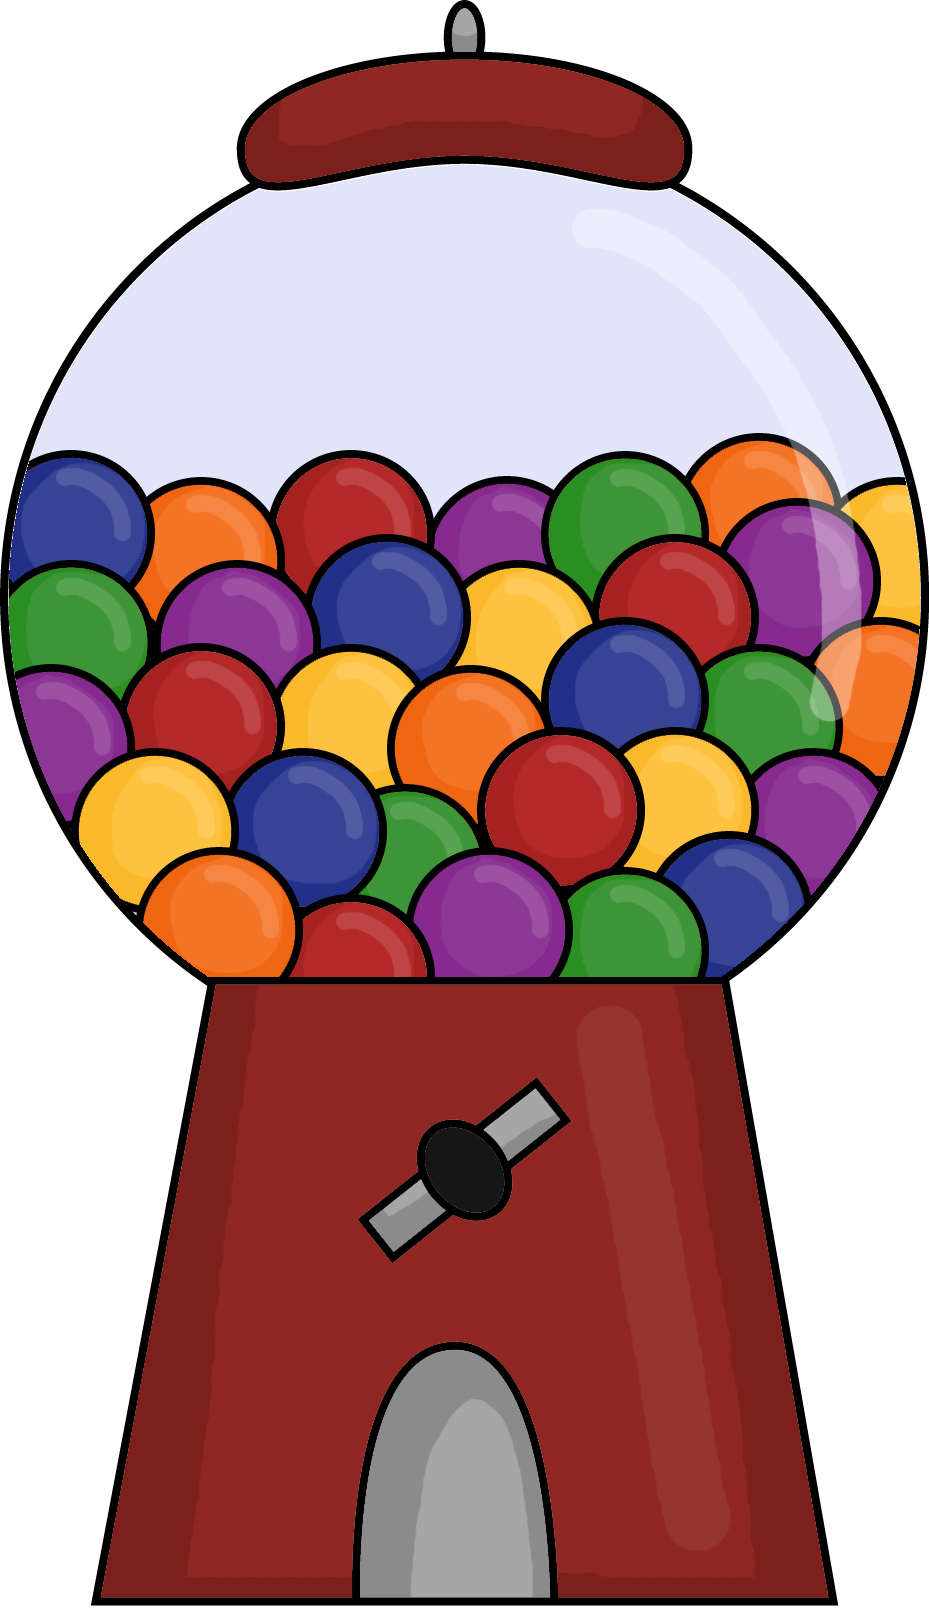 Free Gumball Machine Cliparts, Download Free Gumball Machine Cliparts